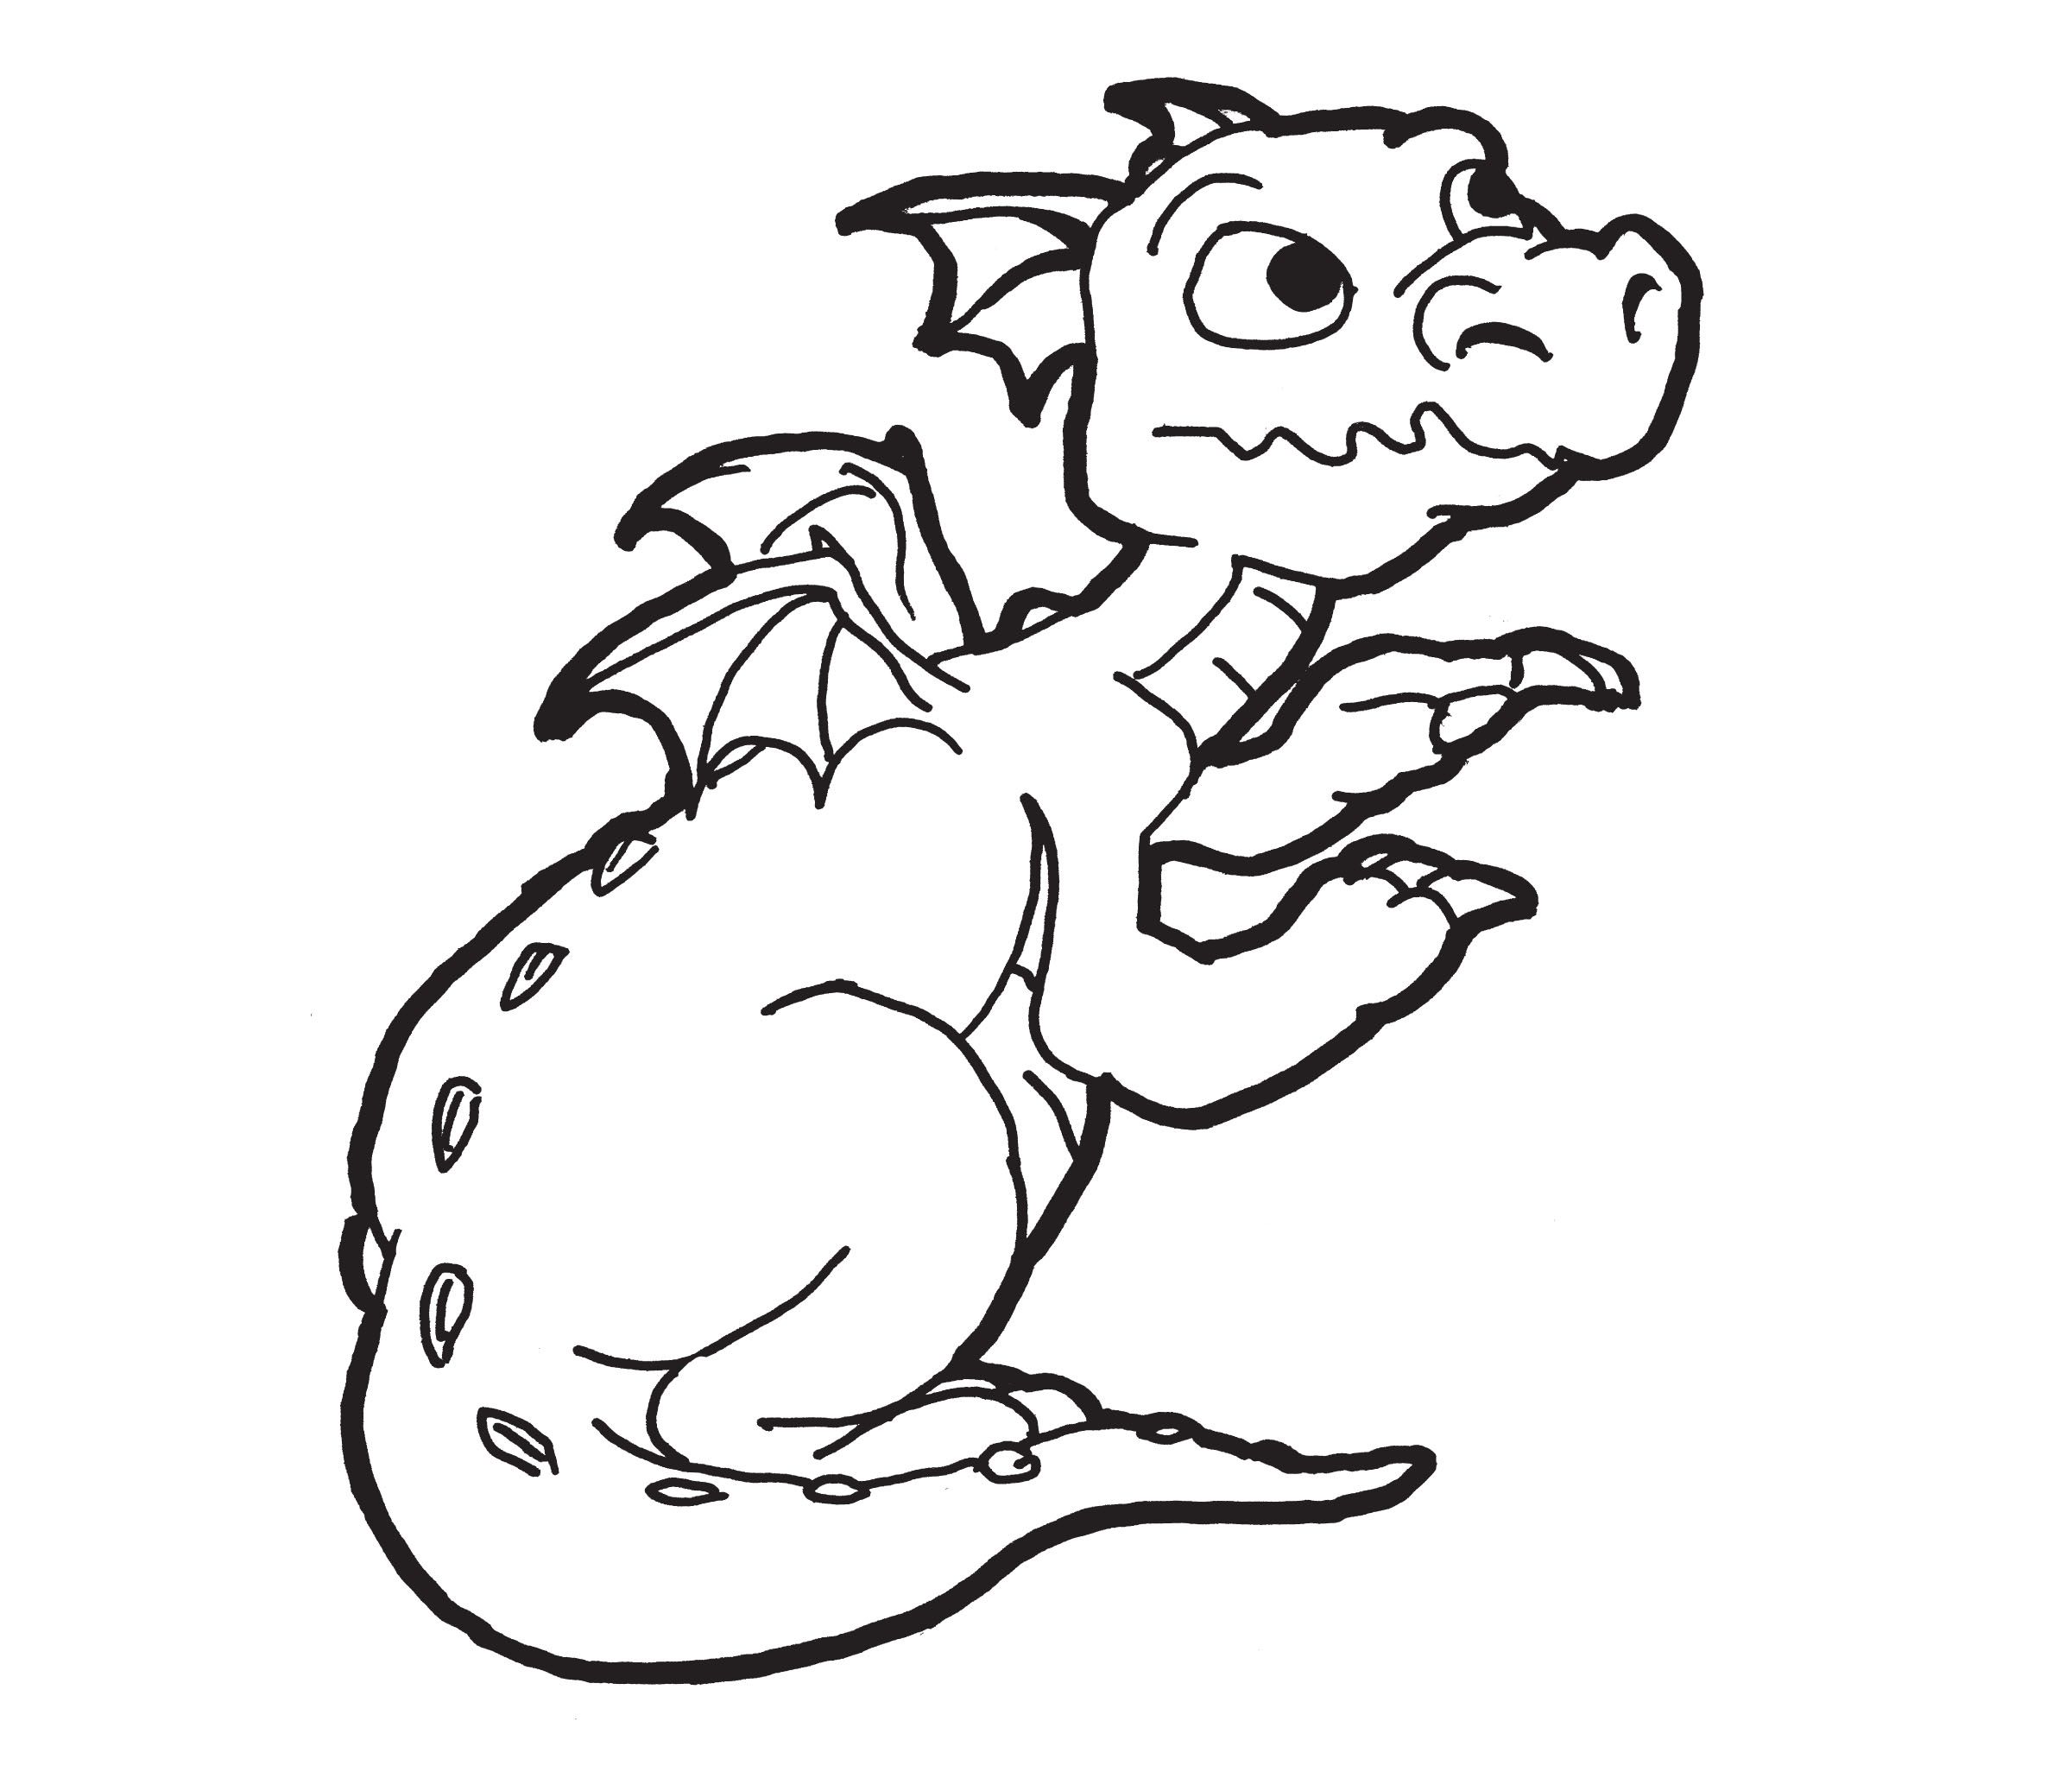 Free Baby Dragon Coloring Pages, Download Free Baby Dragon Coloring